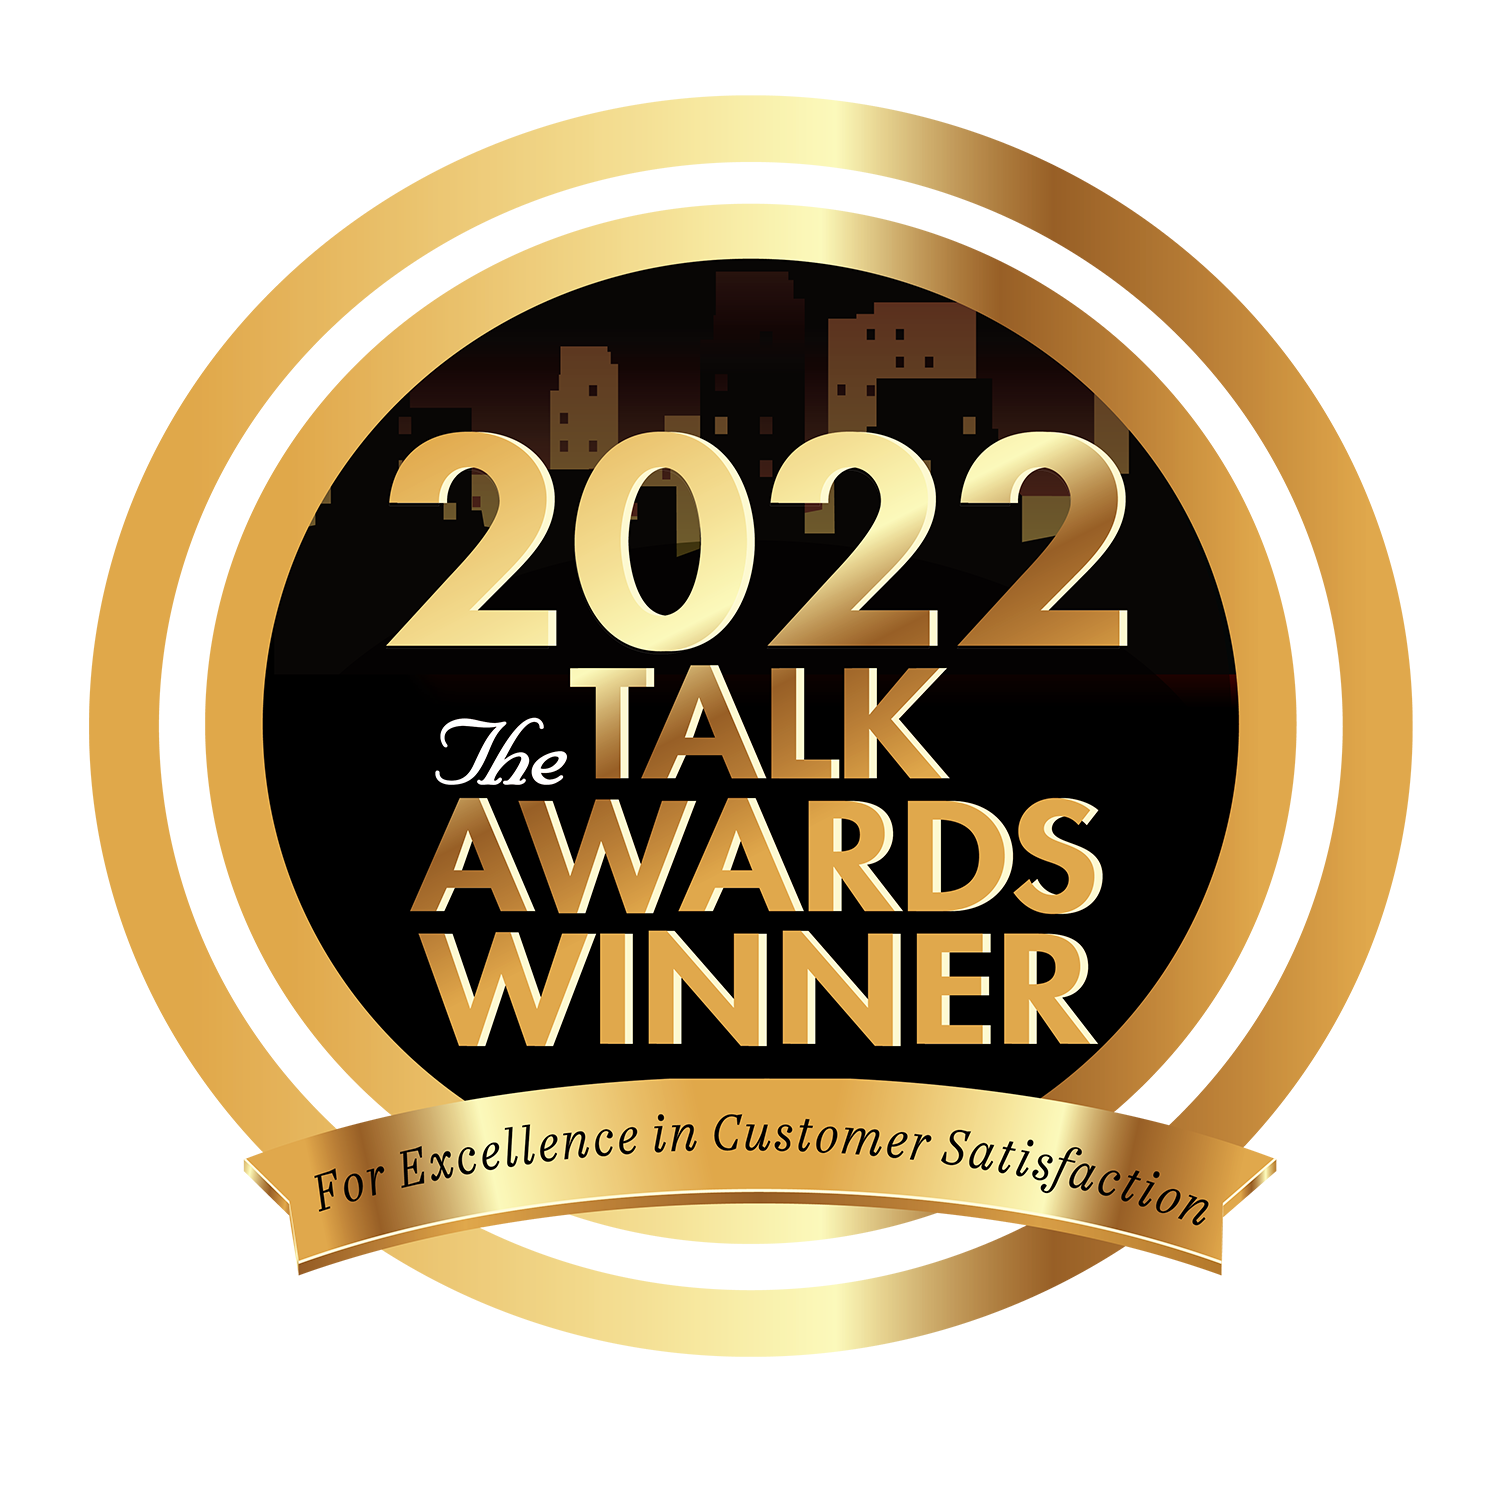 Dr. Mele wins 2022 Talk Award for Excellence in Customer Service